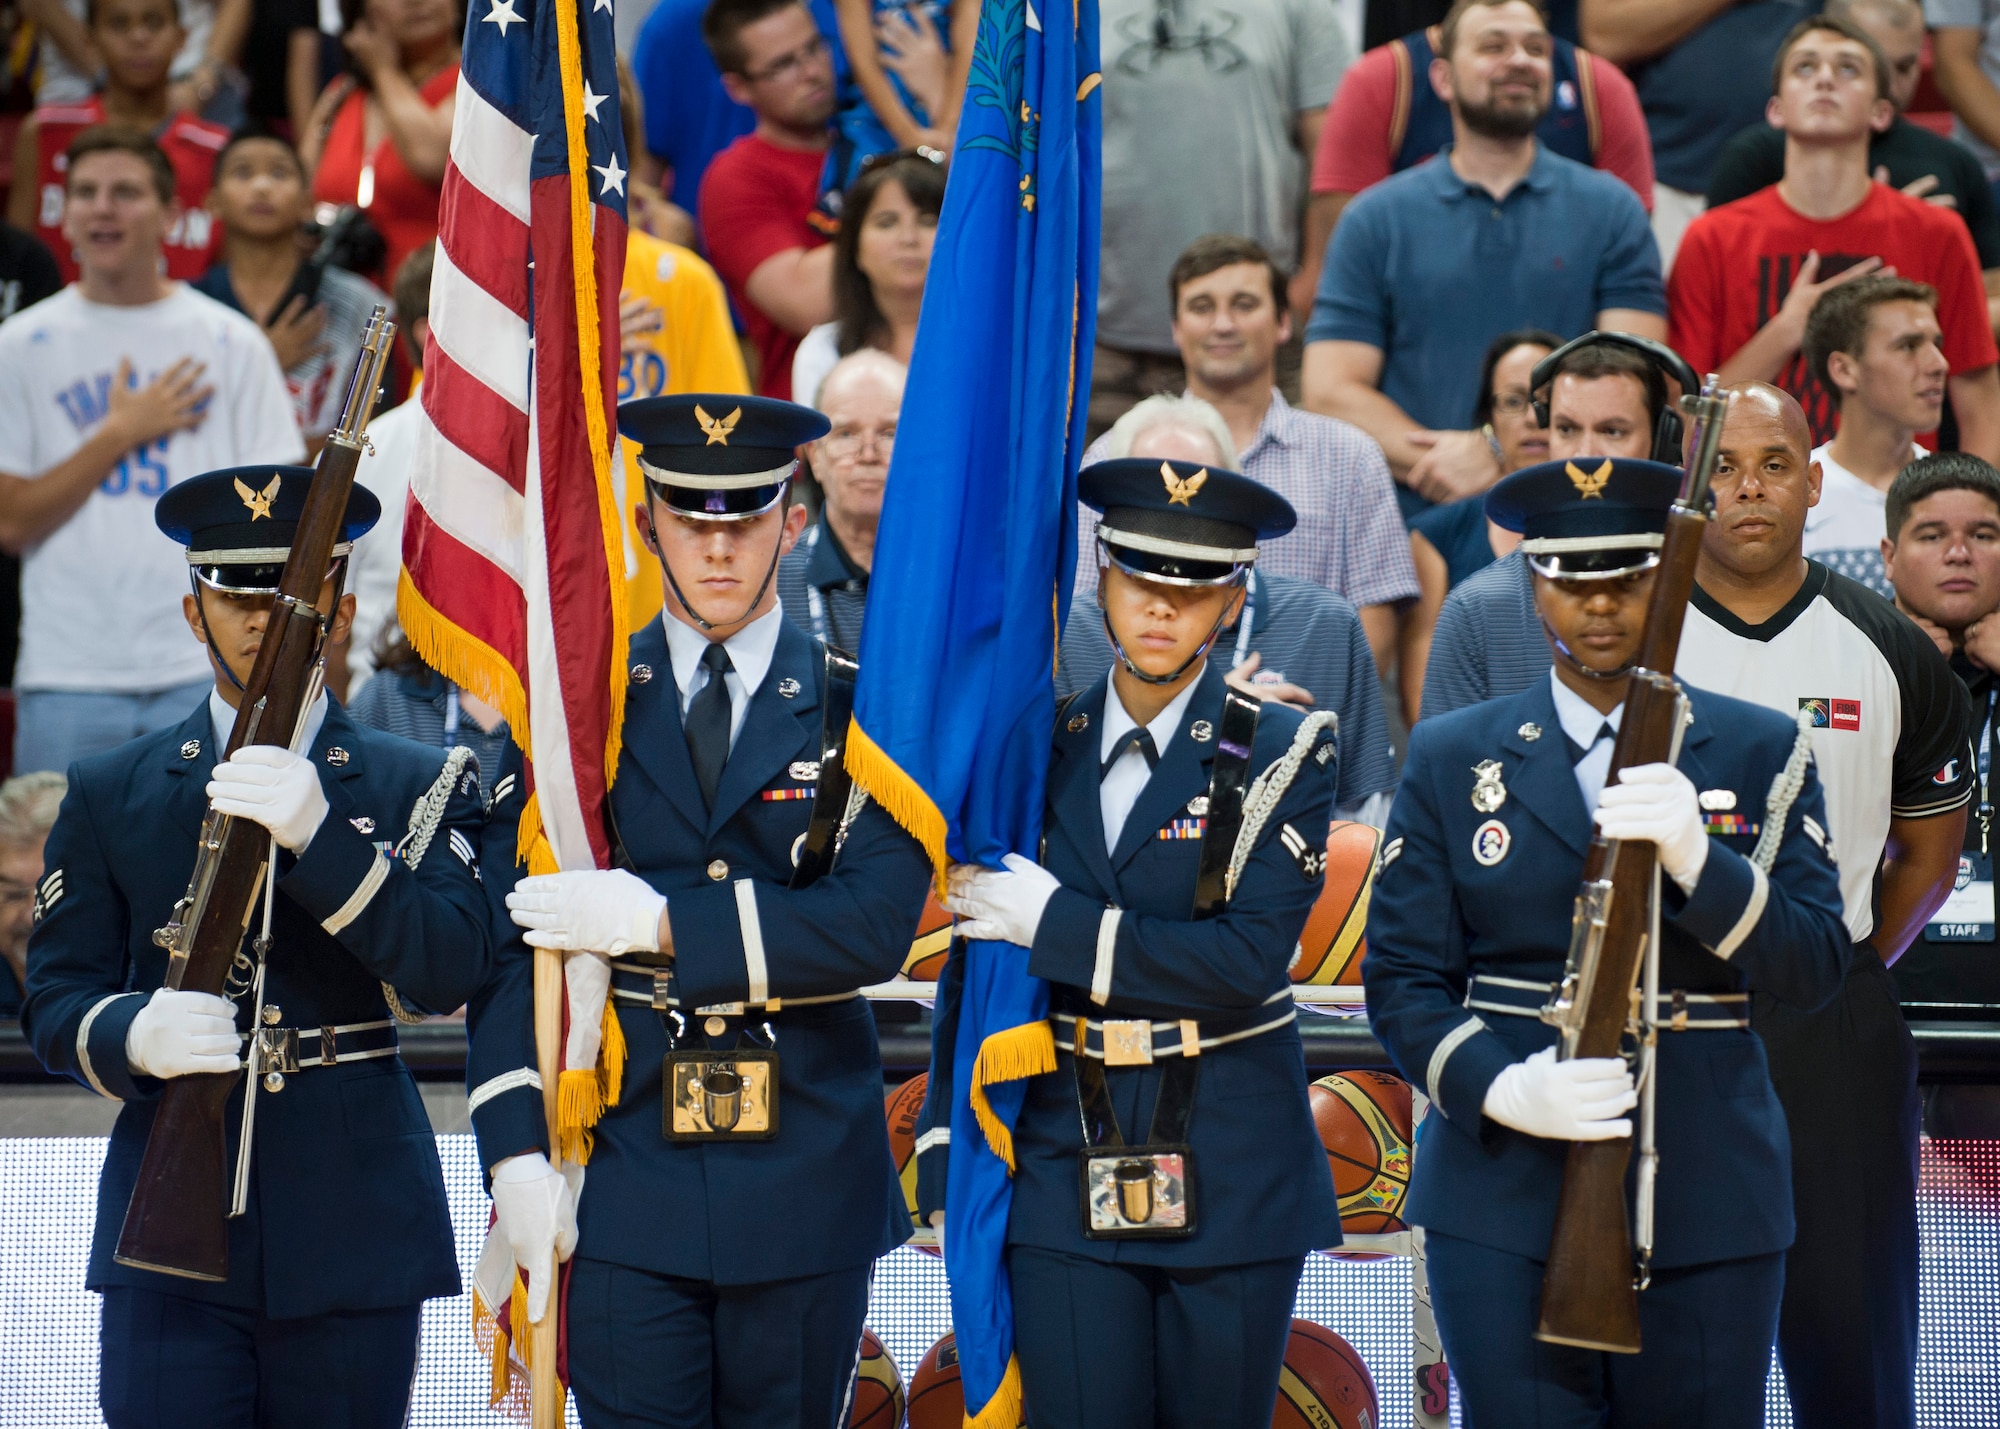 The Nellis Air Force Base Honor Guard prepares to present the colors for the playing of the National Anthem before an intra-squad scrimmage of the USA Basketball Men’s National Team at the Thomas and Mack Center, August 1, 2014, Las Vegas. The Nellis Honor Guard preforms color guard more than 200 times a year. (U.S. Air Force photo by Airman 1st Class Thomas Spangler)